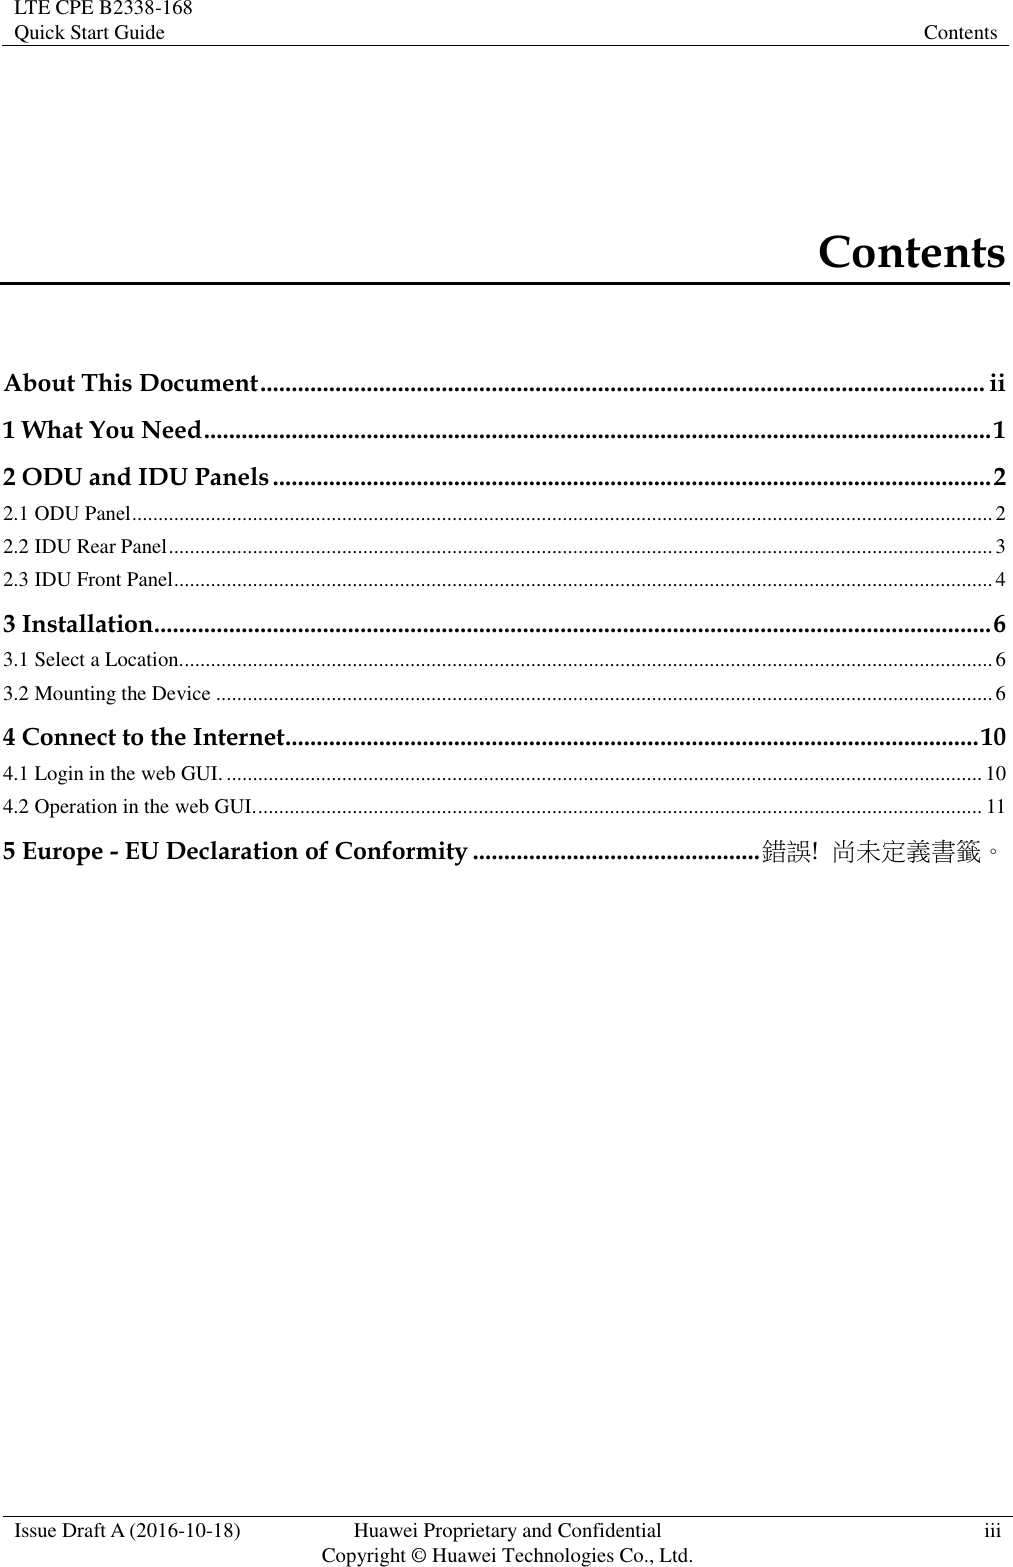 LTE CPE B2338-168   Quick Start Guide Contents  Issue Draft A (2016-10-18) Huawei Proprietary and Confidential                                     Copyright ©  Huawei Technologies Co., Ltd. iii  Contents About This Document .................................................................................................................... ii 1 What You Need .............................................................................................................................. 1 2 ODU and IDU Panels ................................................................................................................... 2 2.1 ODU Panel .................................................................................................................................................................... 2 2.2 IDU Rear Panel ............................................................................................................................................................. 3 2.3 IDU Front Panel ............................................................................................................................................................ 4 3 Installation...................................................................................................................................... 6 3.1 Select a Location. .......................................................................................................................................................... 6 3.2 Mounting the Device .................................................................................................................................................... 6 4 Connect to the Internet ............................................................................................................... 10 4.1 Login in the web GUI. ................................................................................................................................................ 10 4.2 Operation in the web GUI. .......................................................................................................................................... 11 5 Europe - EU Declaration of Conformity .............................................. 錯誤!  尚未定義書籤。 